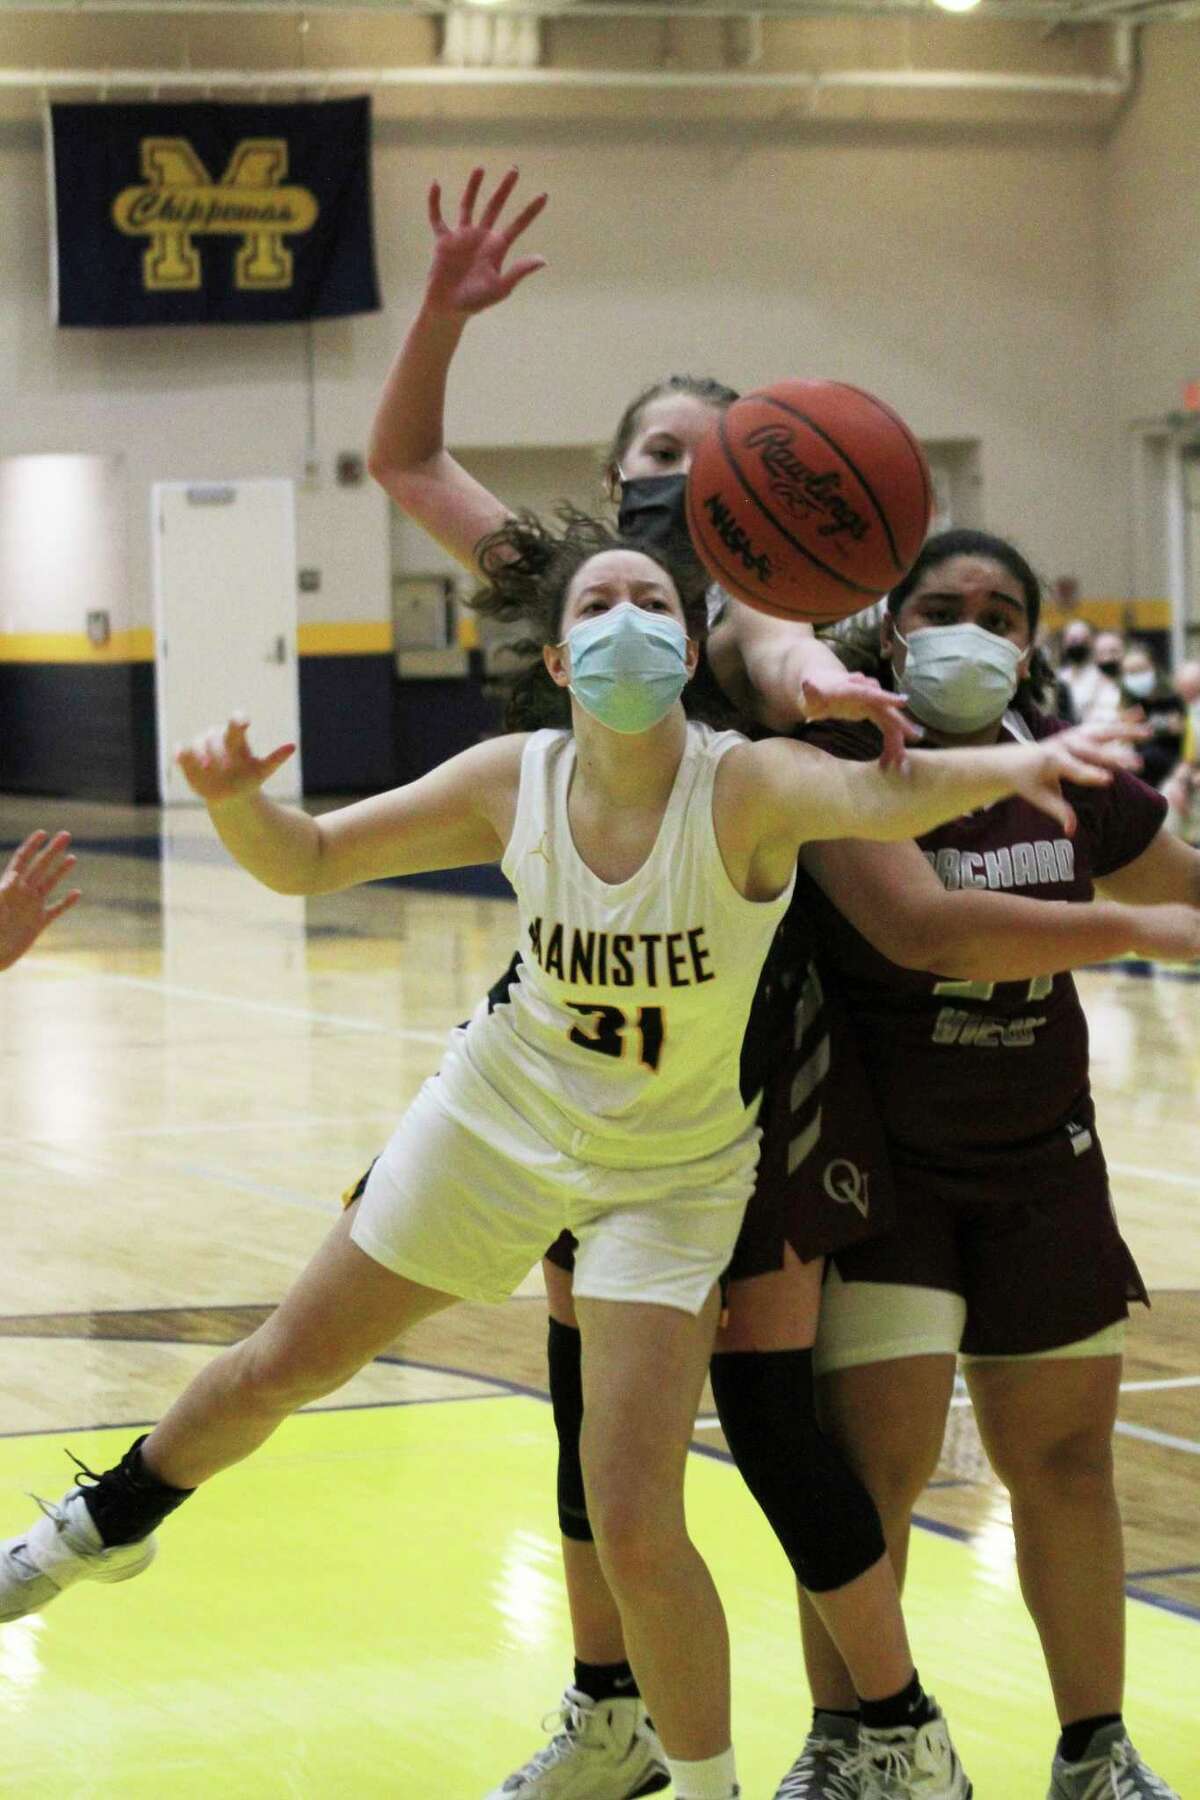 Manistee's Abigail Robinson eyes a loose ball Tuesday night in the Chippewas' victory over Orchard View. (Dylan Savela/News Advocate)